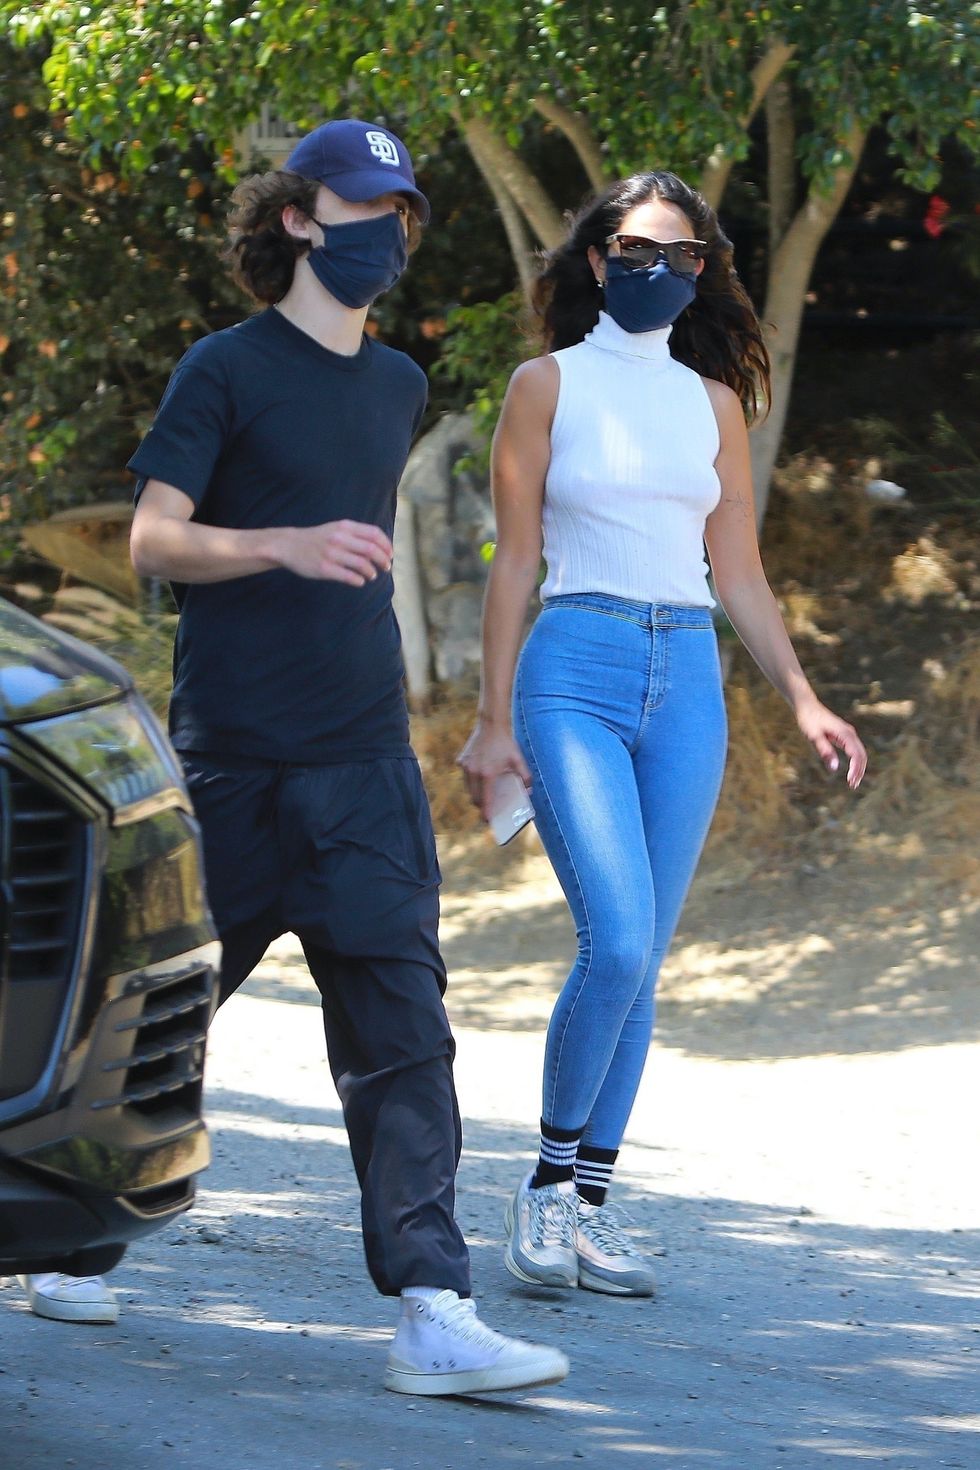 premium exclusive los angeles, ca    hot new couple eiza gonzález and timothée chalamet seen getting some fresh air during a casual hike in la  eiza and timothée just came back from a hot and heavy romantic trip in mexicopictured eiza gonzález, timothée chalametbackgrid usa 28 june 2020 usa 1 310 798 9111  usasalesbackgridcomuk 44 208 344 2007  uksalesbackgridcomuk clients   pictures containing childrenplease pixelate face prior to publication